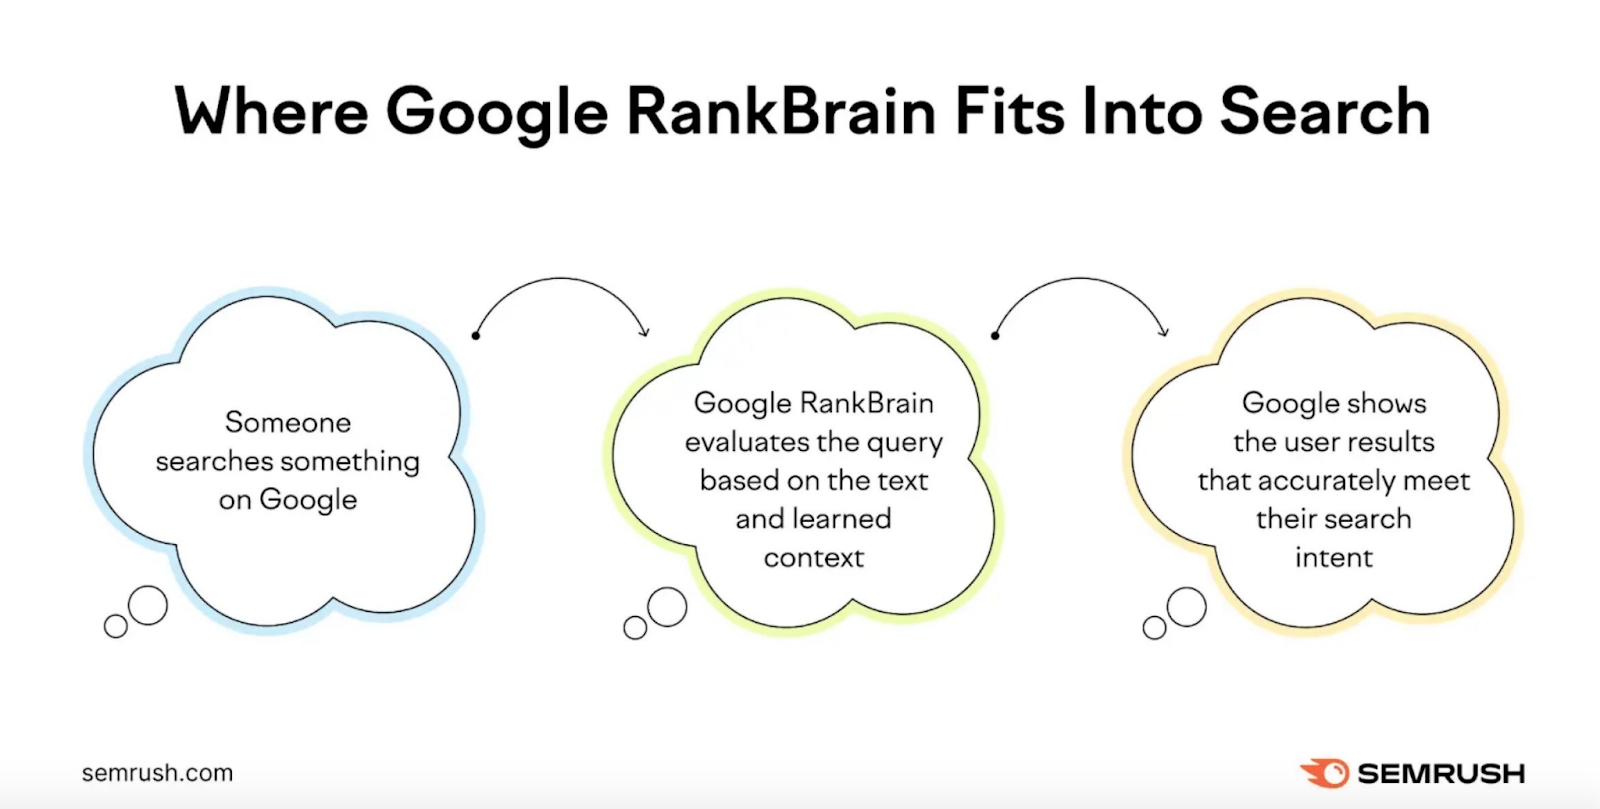 Where Google RankBrain fits into search